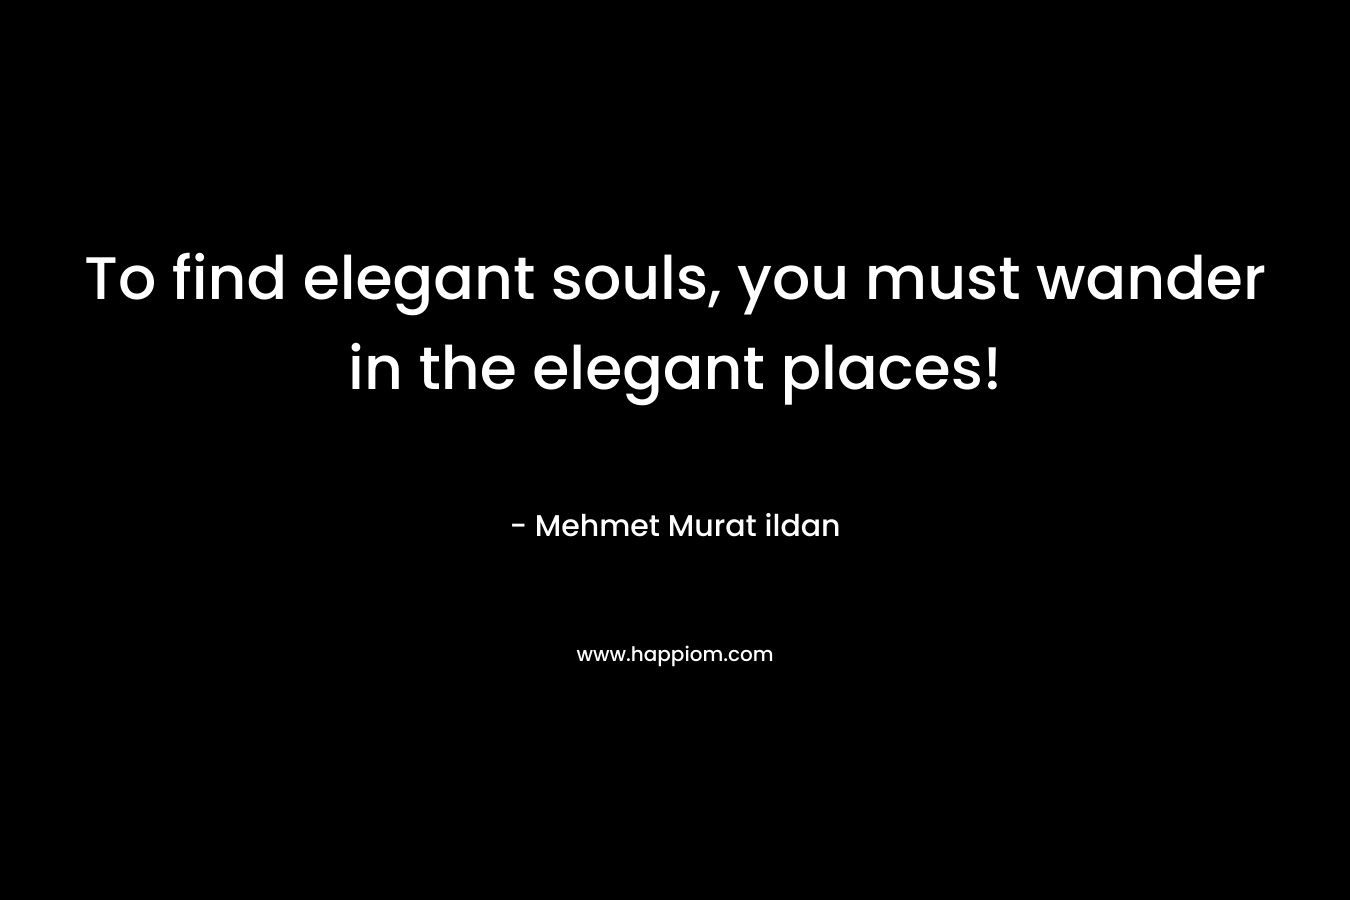 To find elegant souls, you must wander in the elegant places!